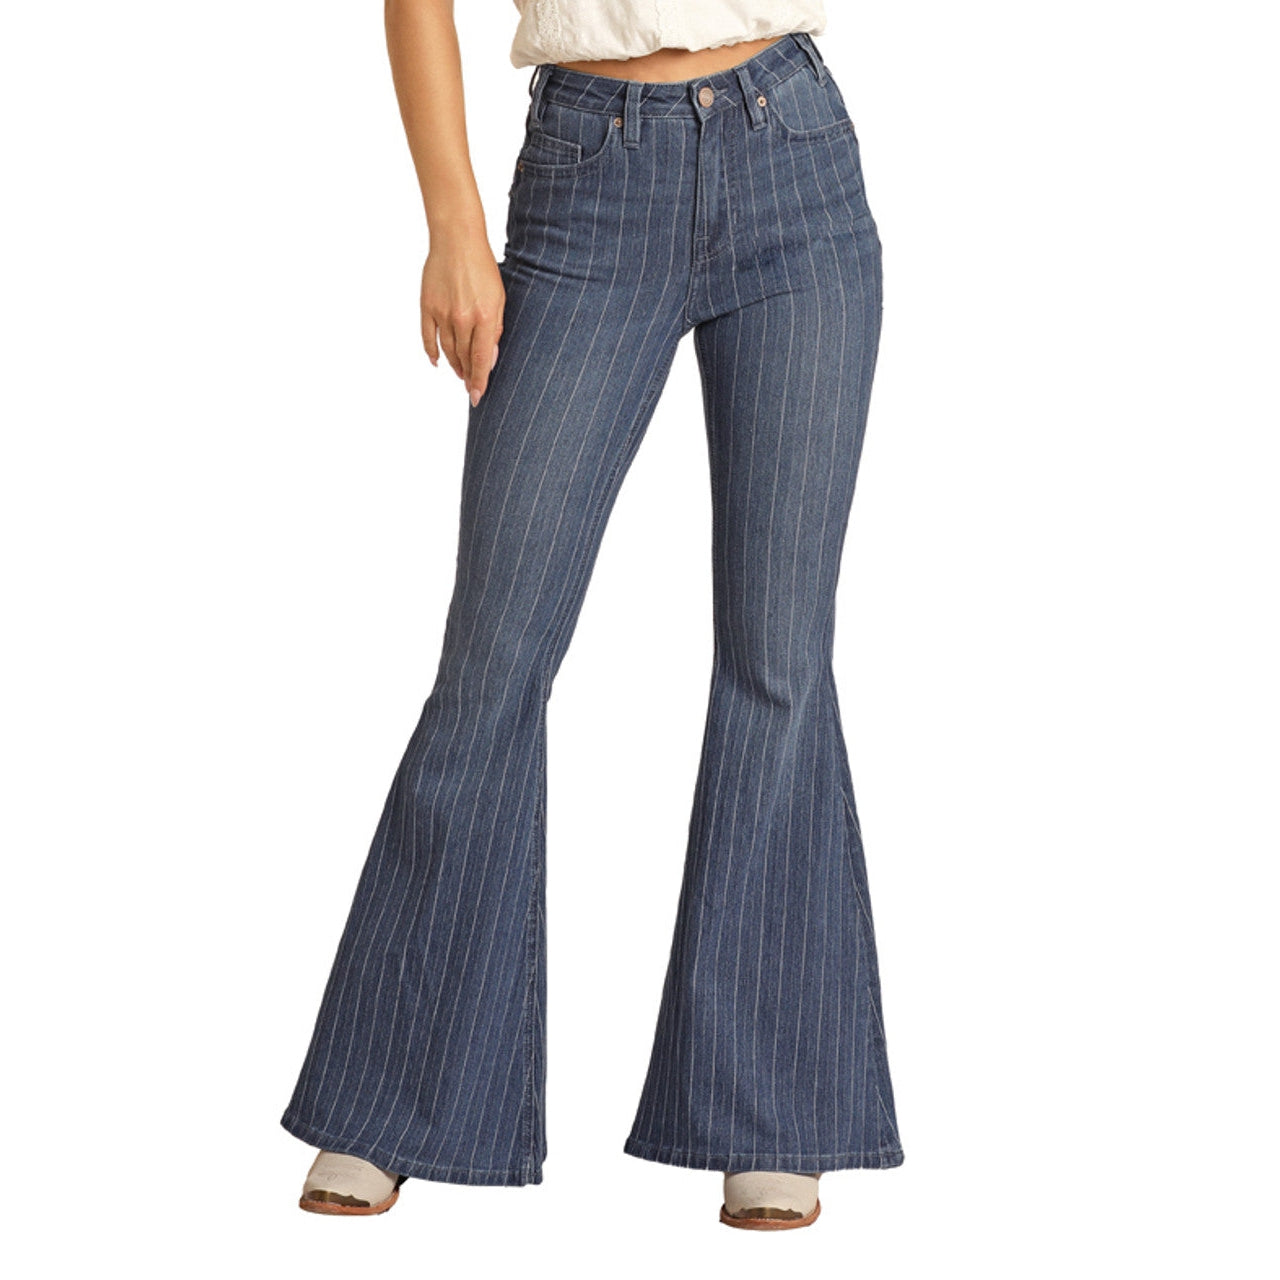 Rock & Roll Women's High Rise Extra Stretch Striped Bell Bottom Jeans